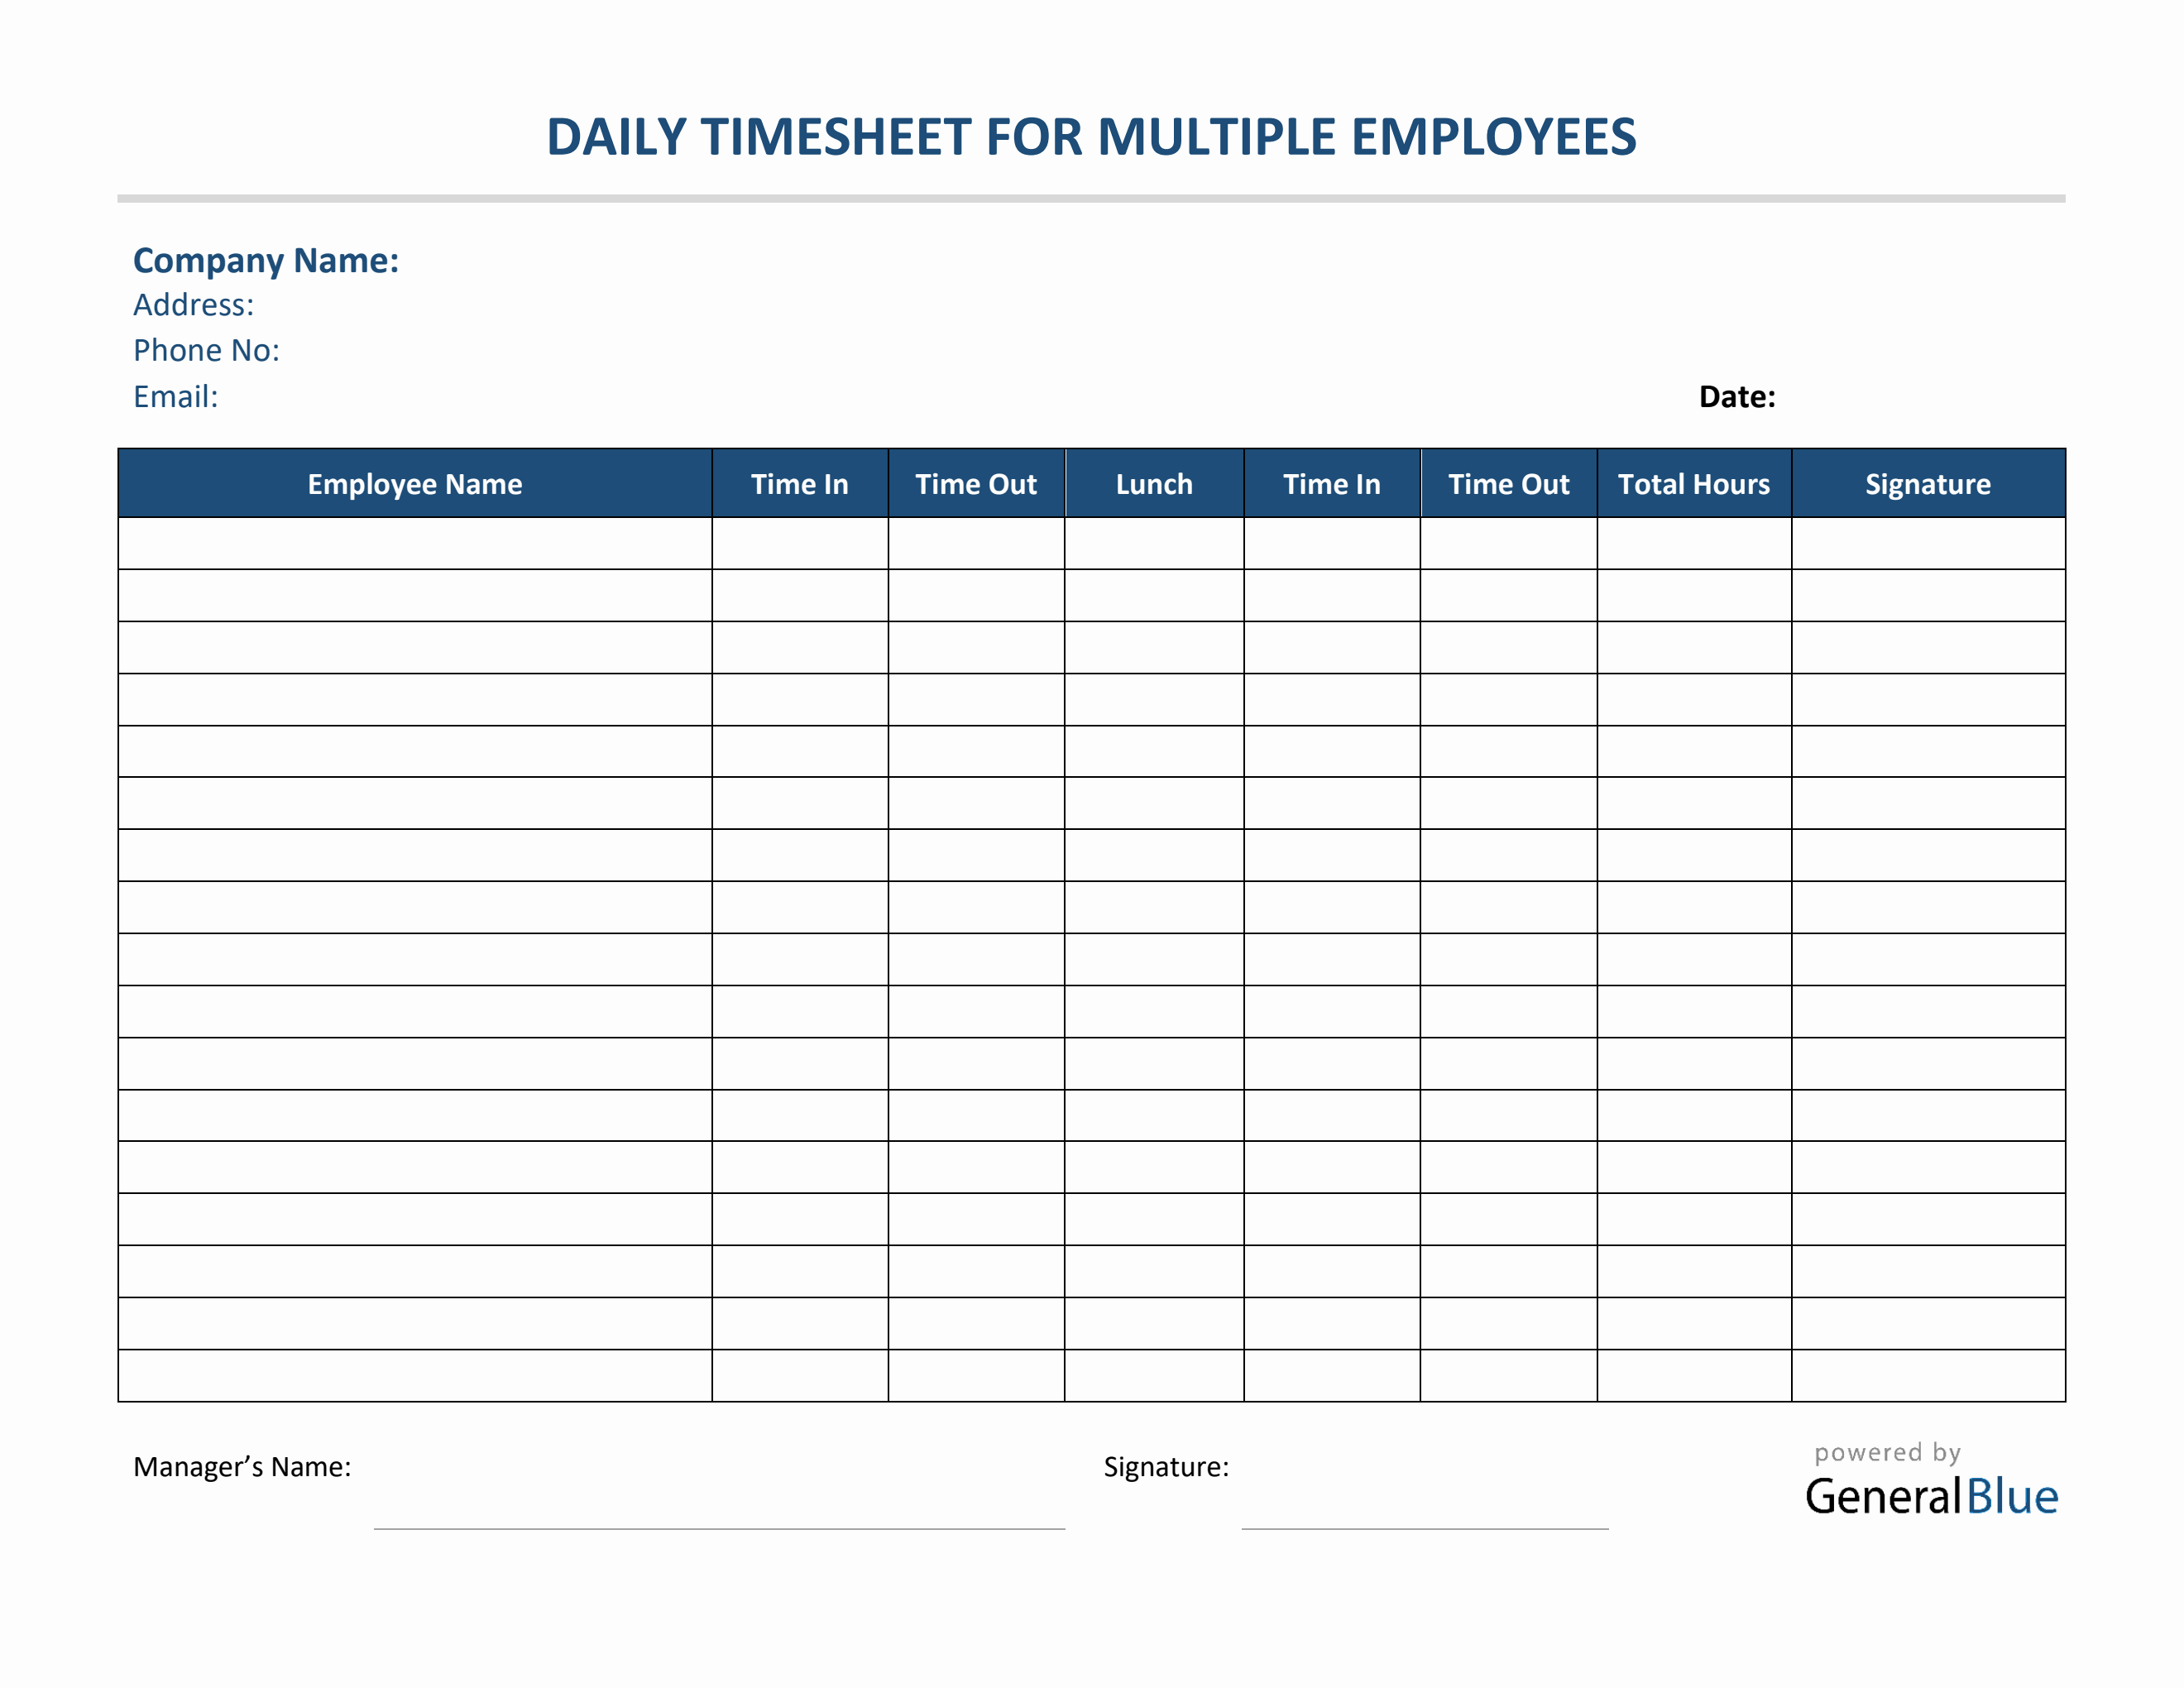 daily-timesheet-for-multiple-employees-in-pdf